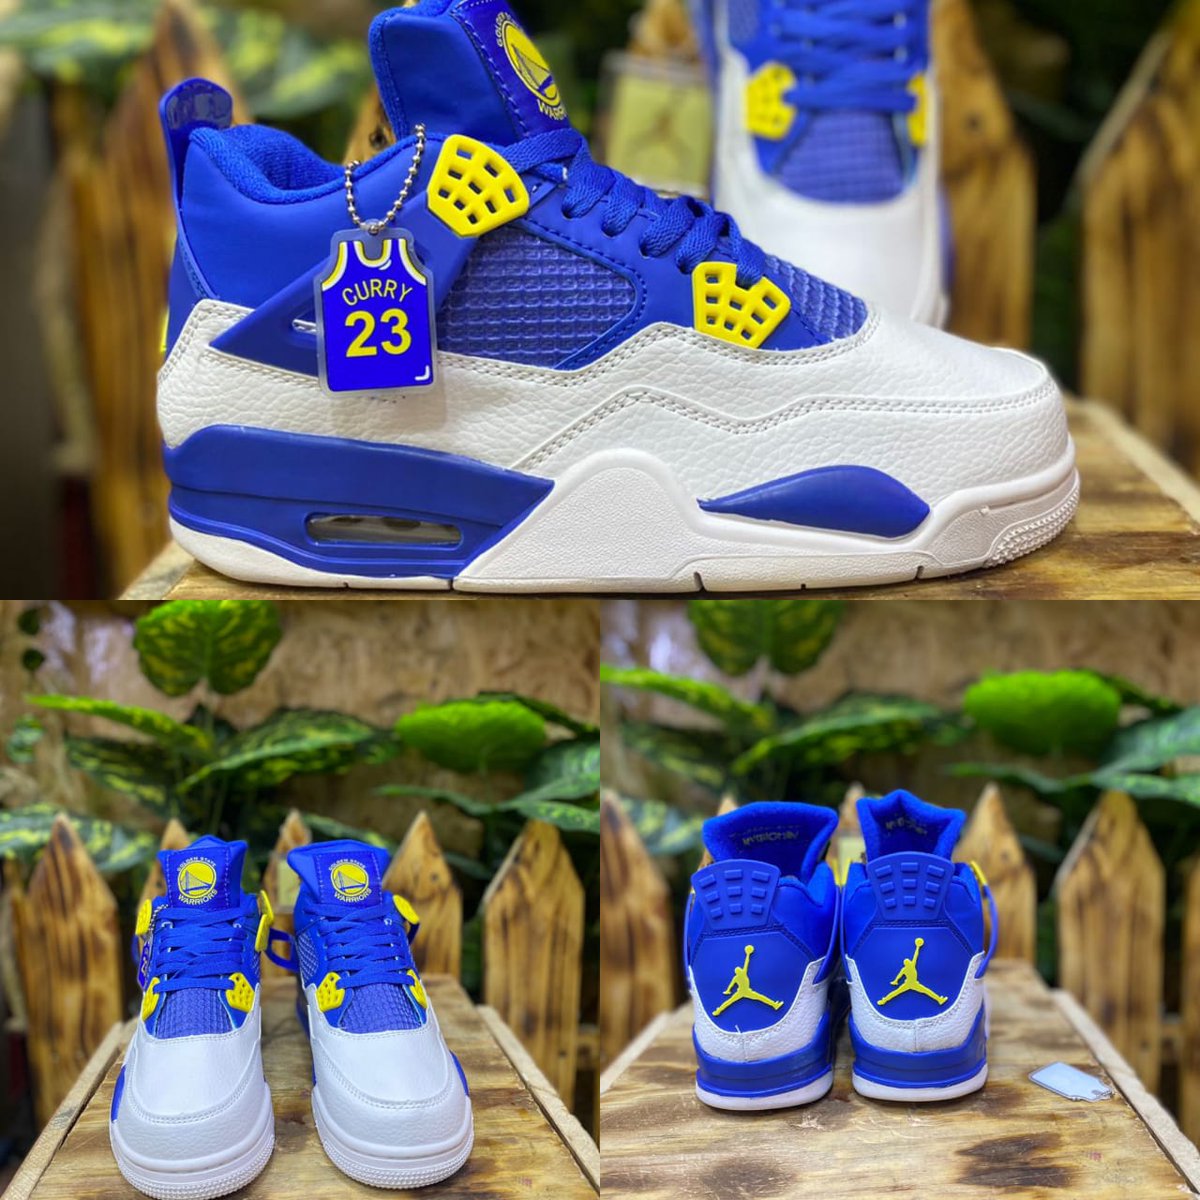 🔥 Jordan 4 curry Golden State warriors, size 41-45 available at KSh.3500 per pair. 
Call/WhatsApp 0721902040
Pay to mpesa Till: 9765587  👇